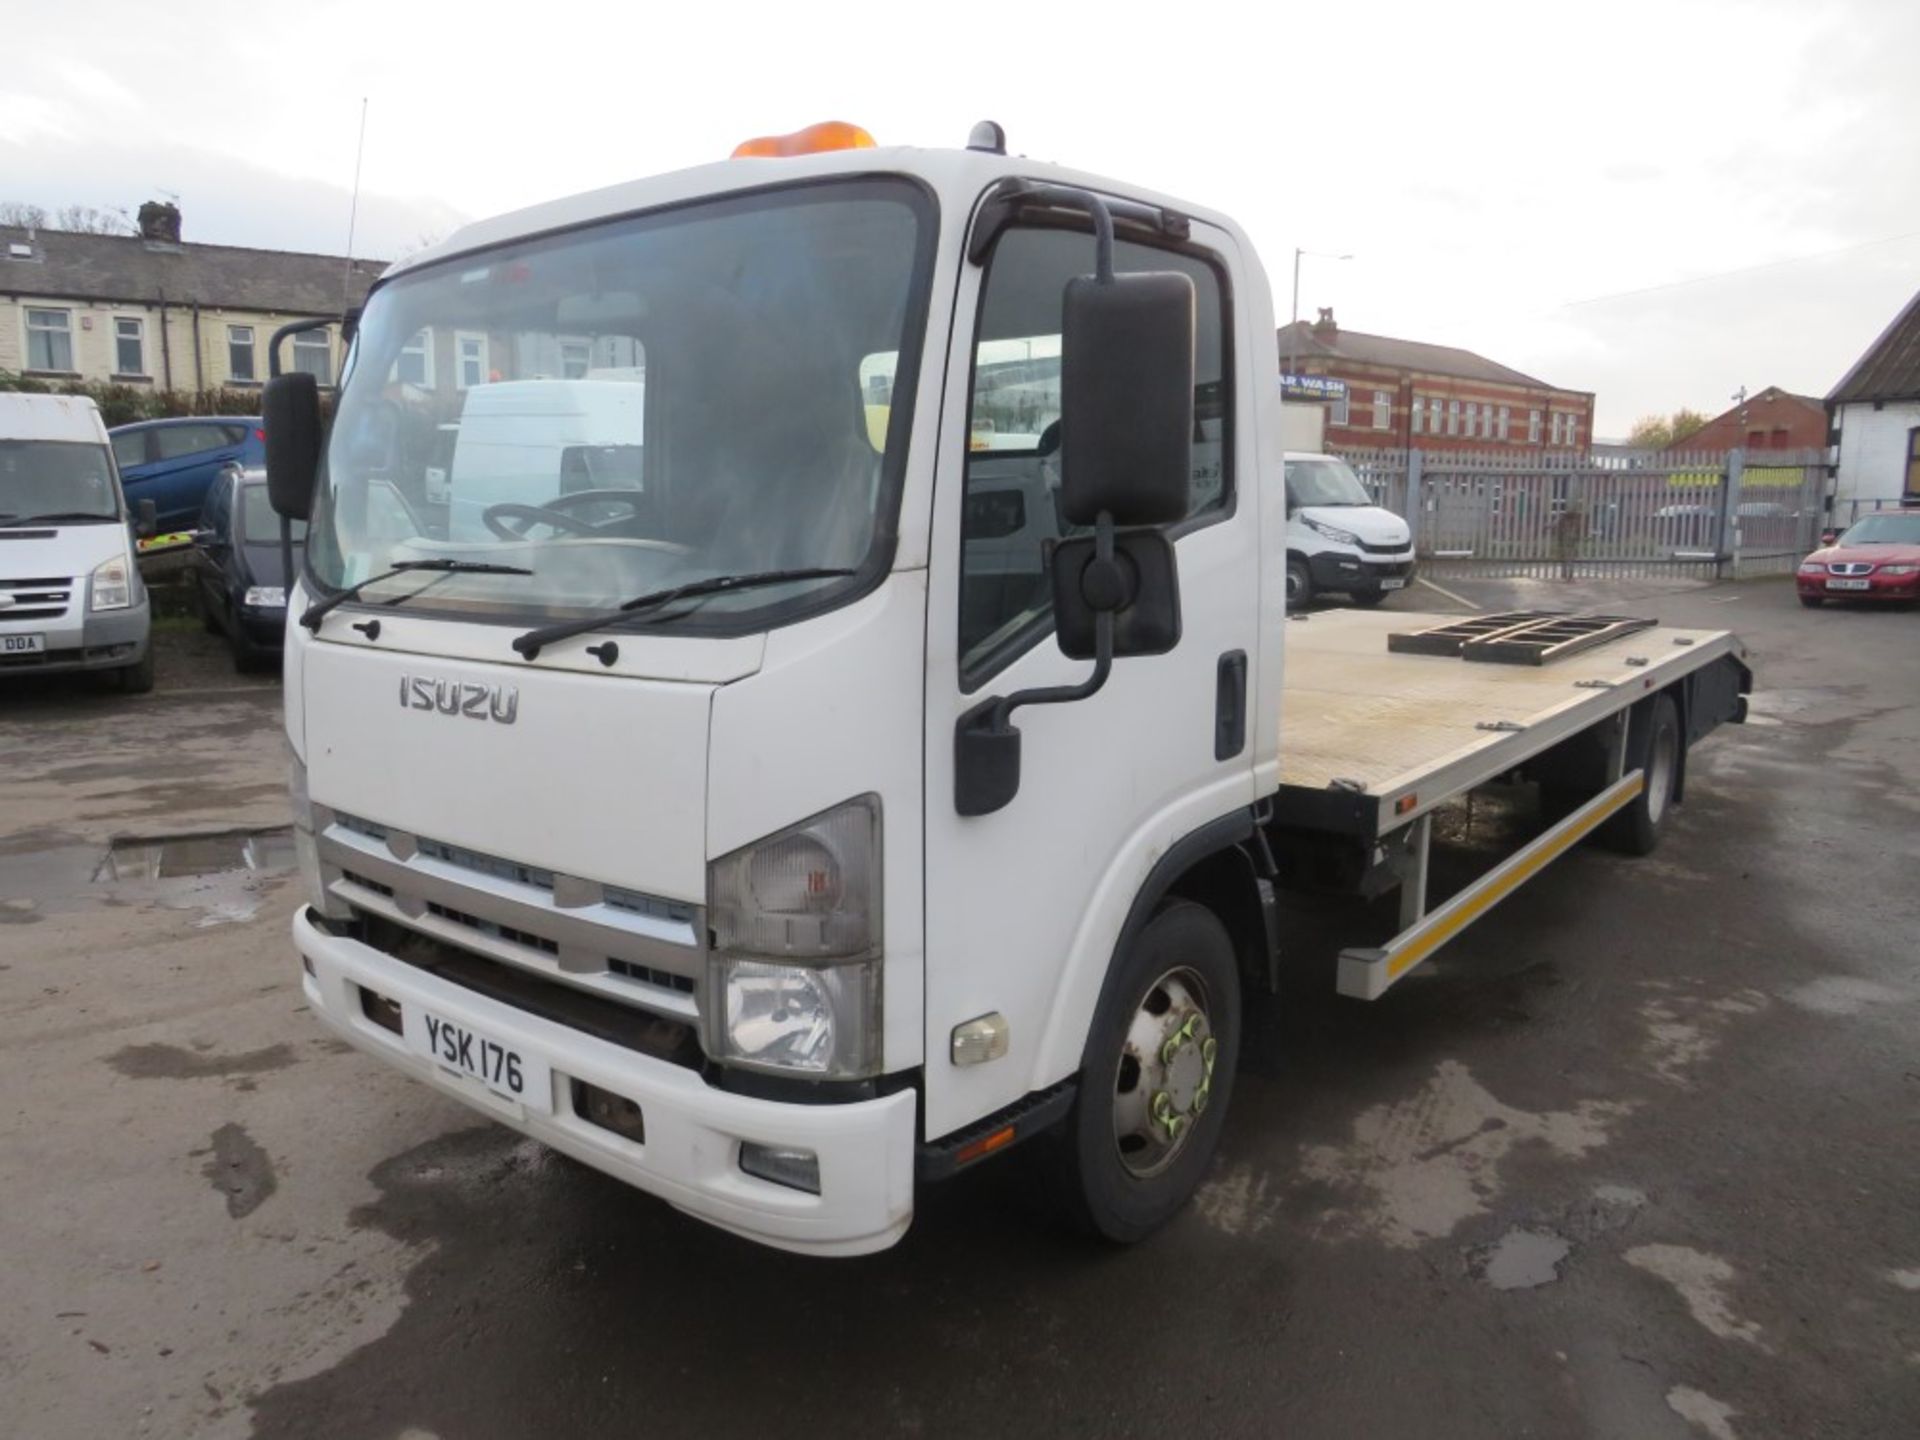 2010 10 reg ISUZU FORWARD N75.190 7.5 TON RECOVERY TRUCK (REG NO NOT INCLUDED IN SALE) - Image 2 of 5